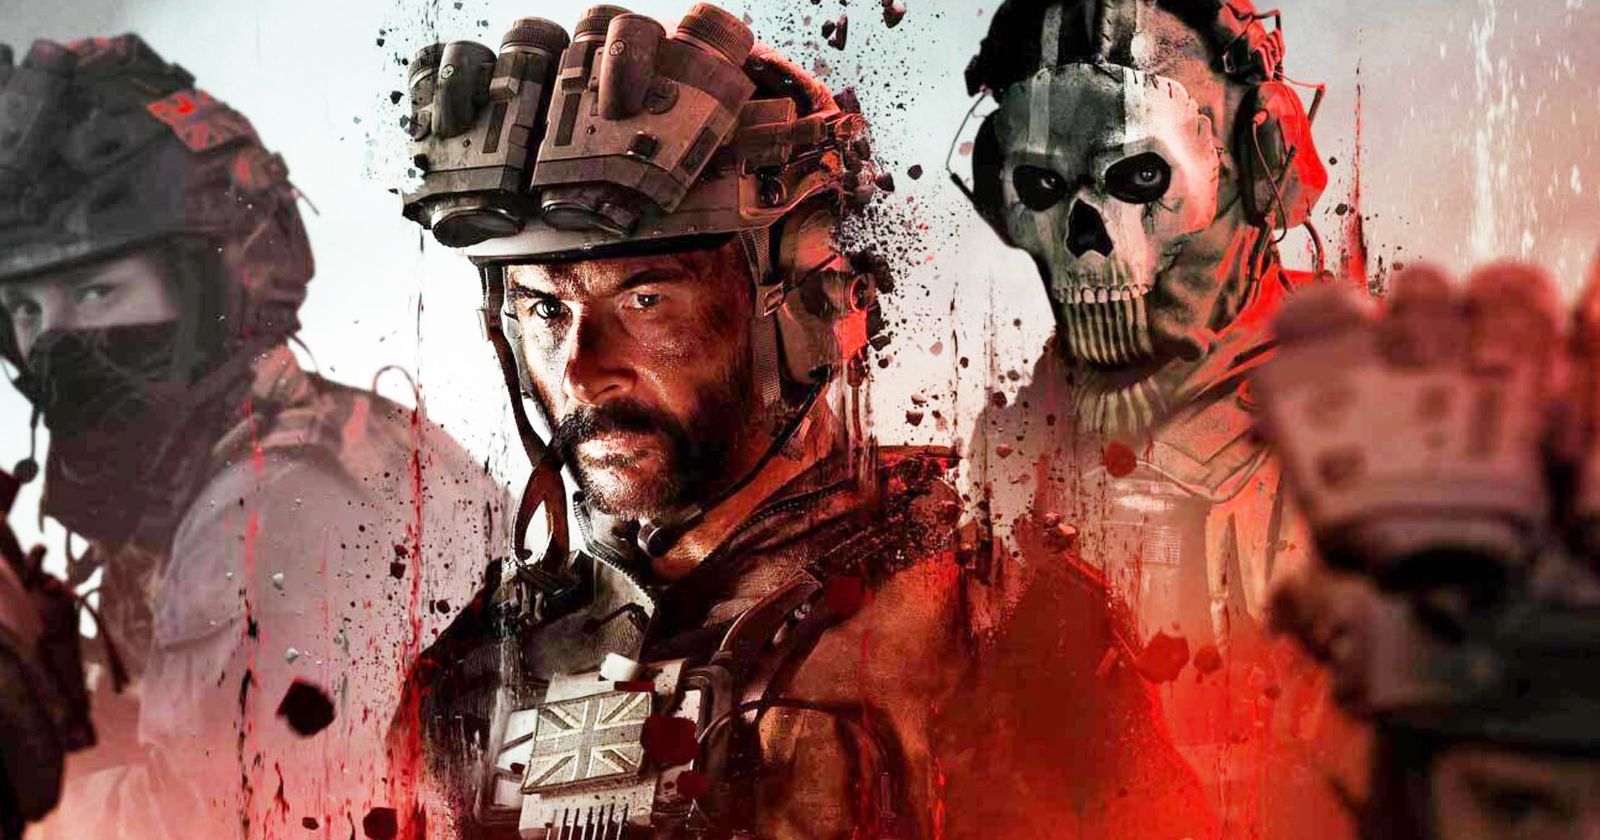 Modern Warfare 3 is the lowest-rated CoD game ever - Charlie INTEL